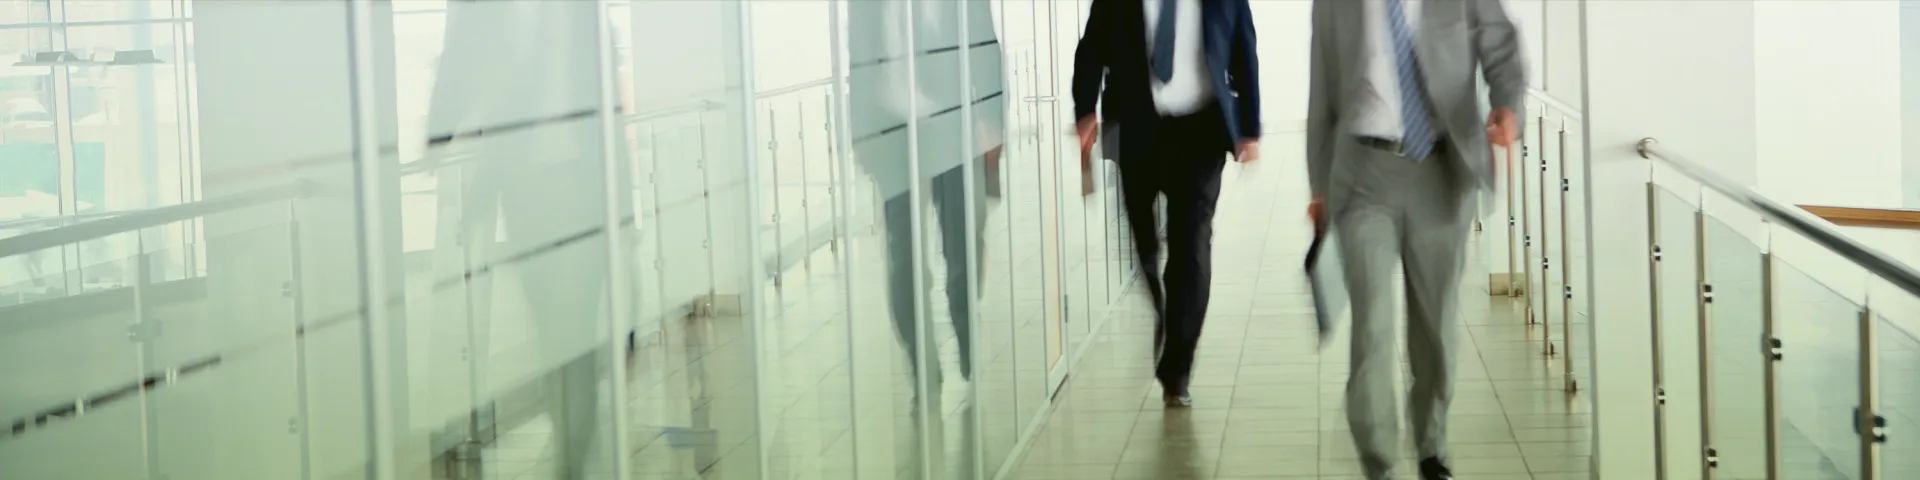 Vermont Financial Planning Team walking down a hallway talking together